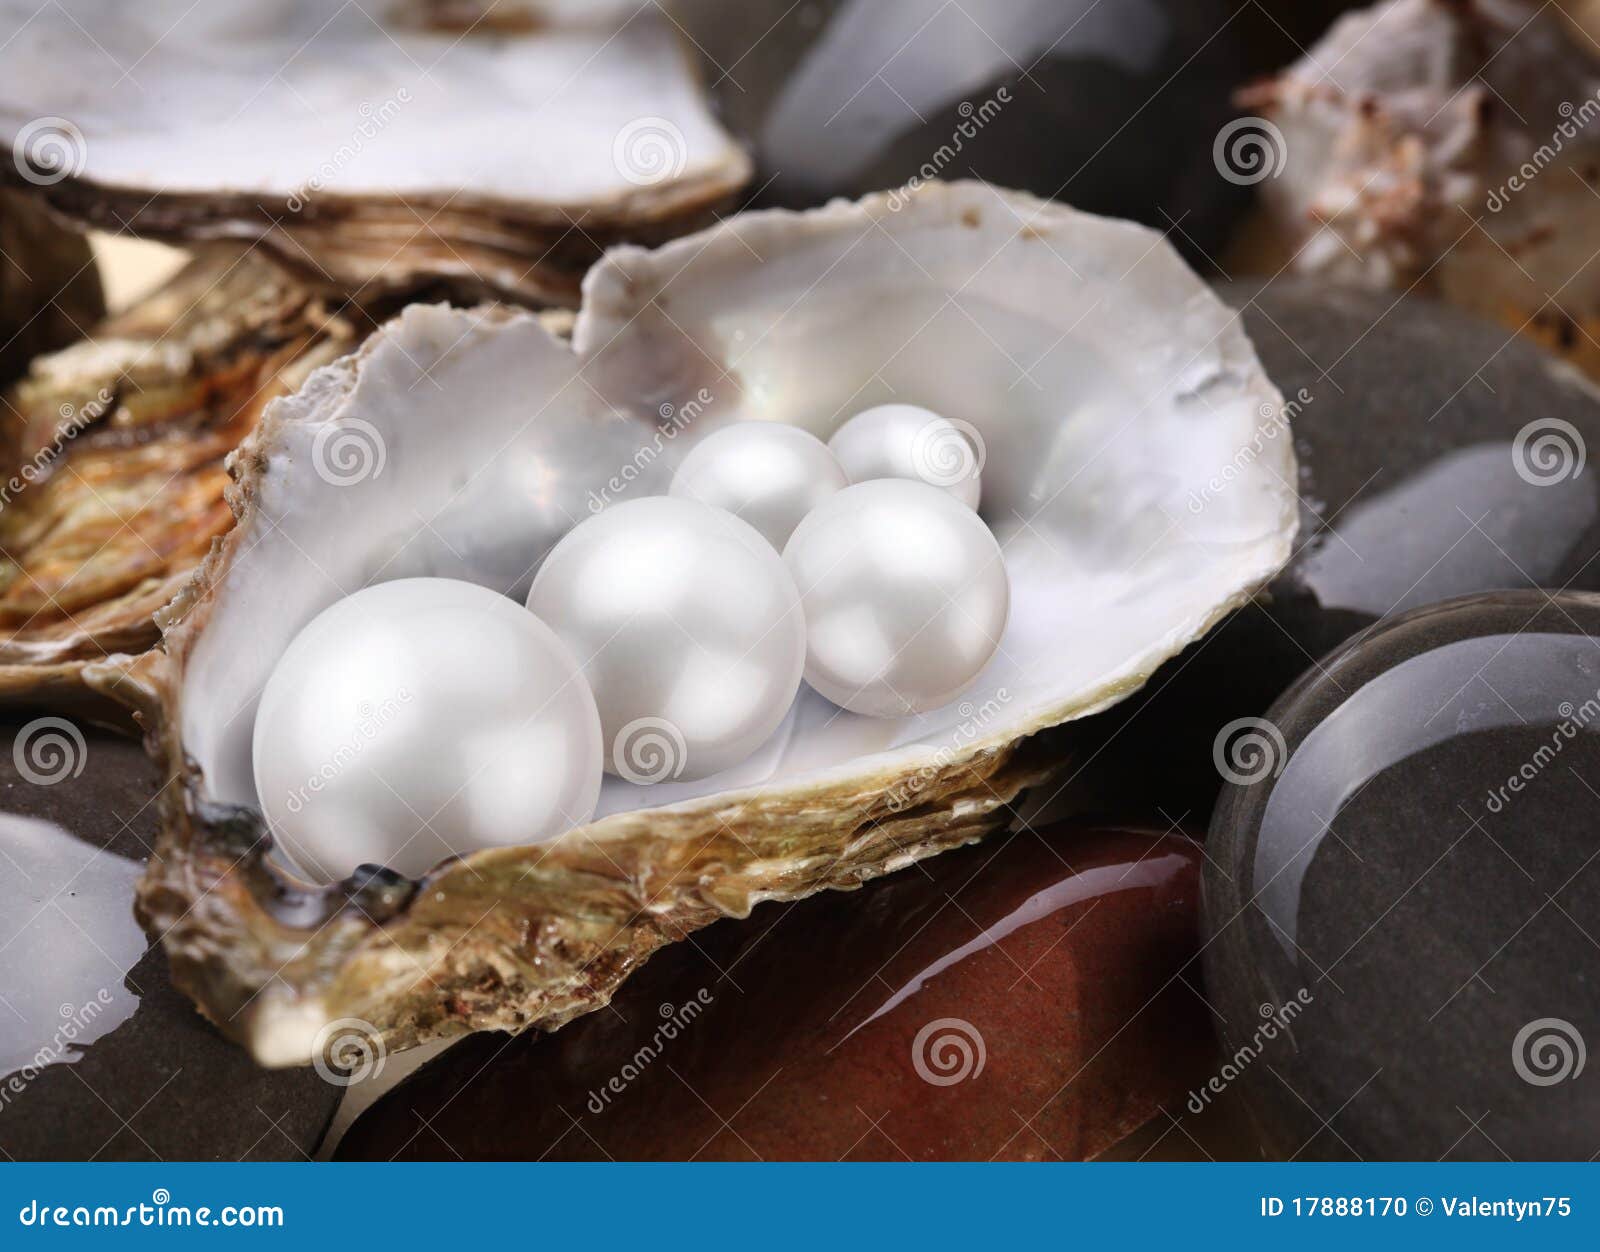 image placer pearls in a shell